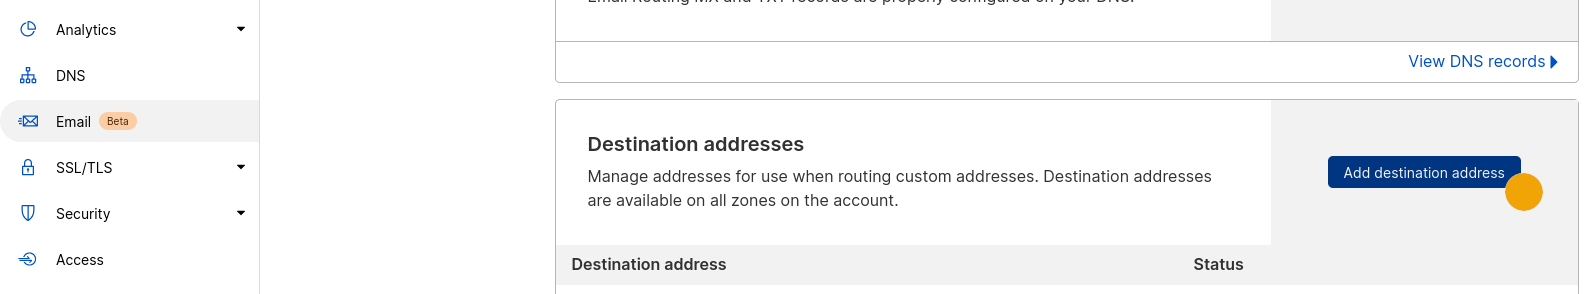 Navigate to the Email Routing Page and add a destination address